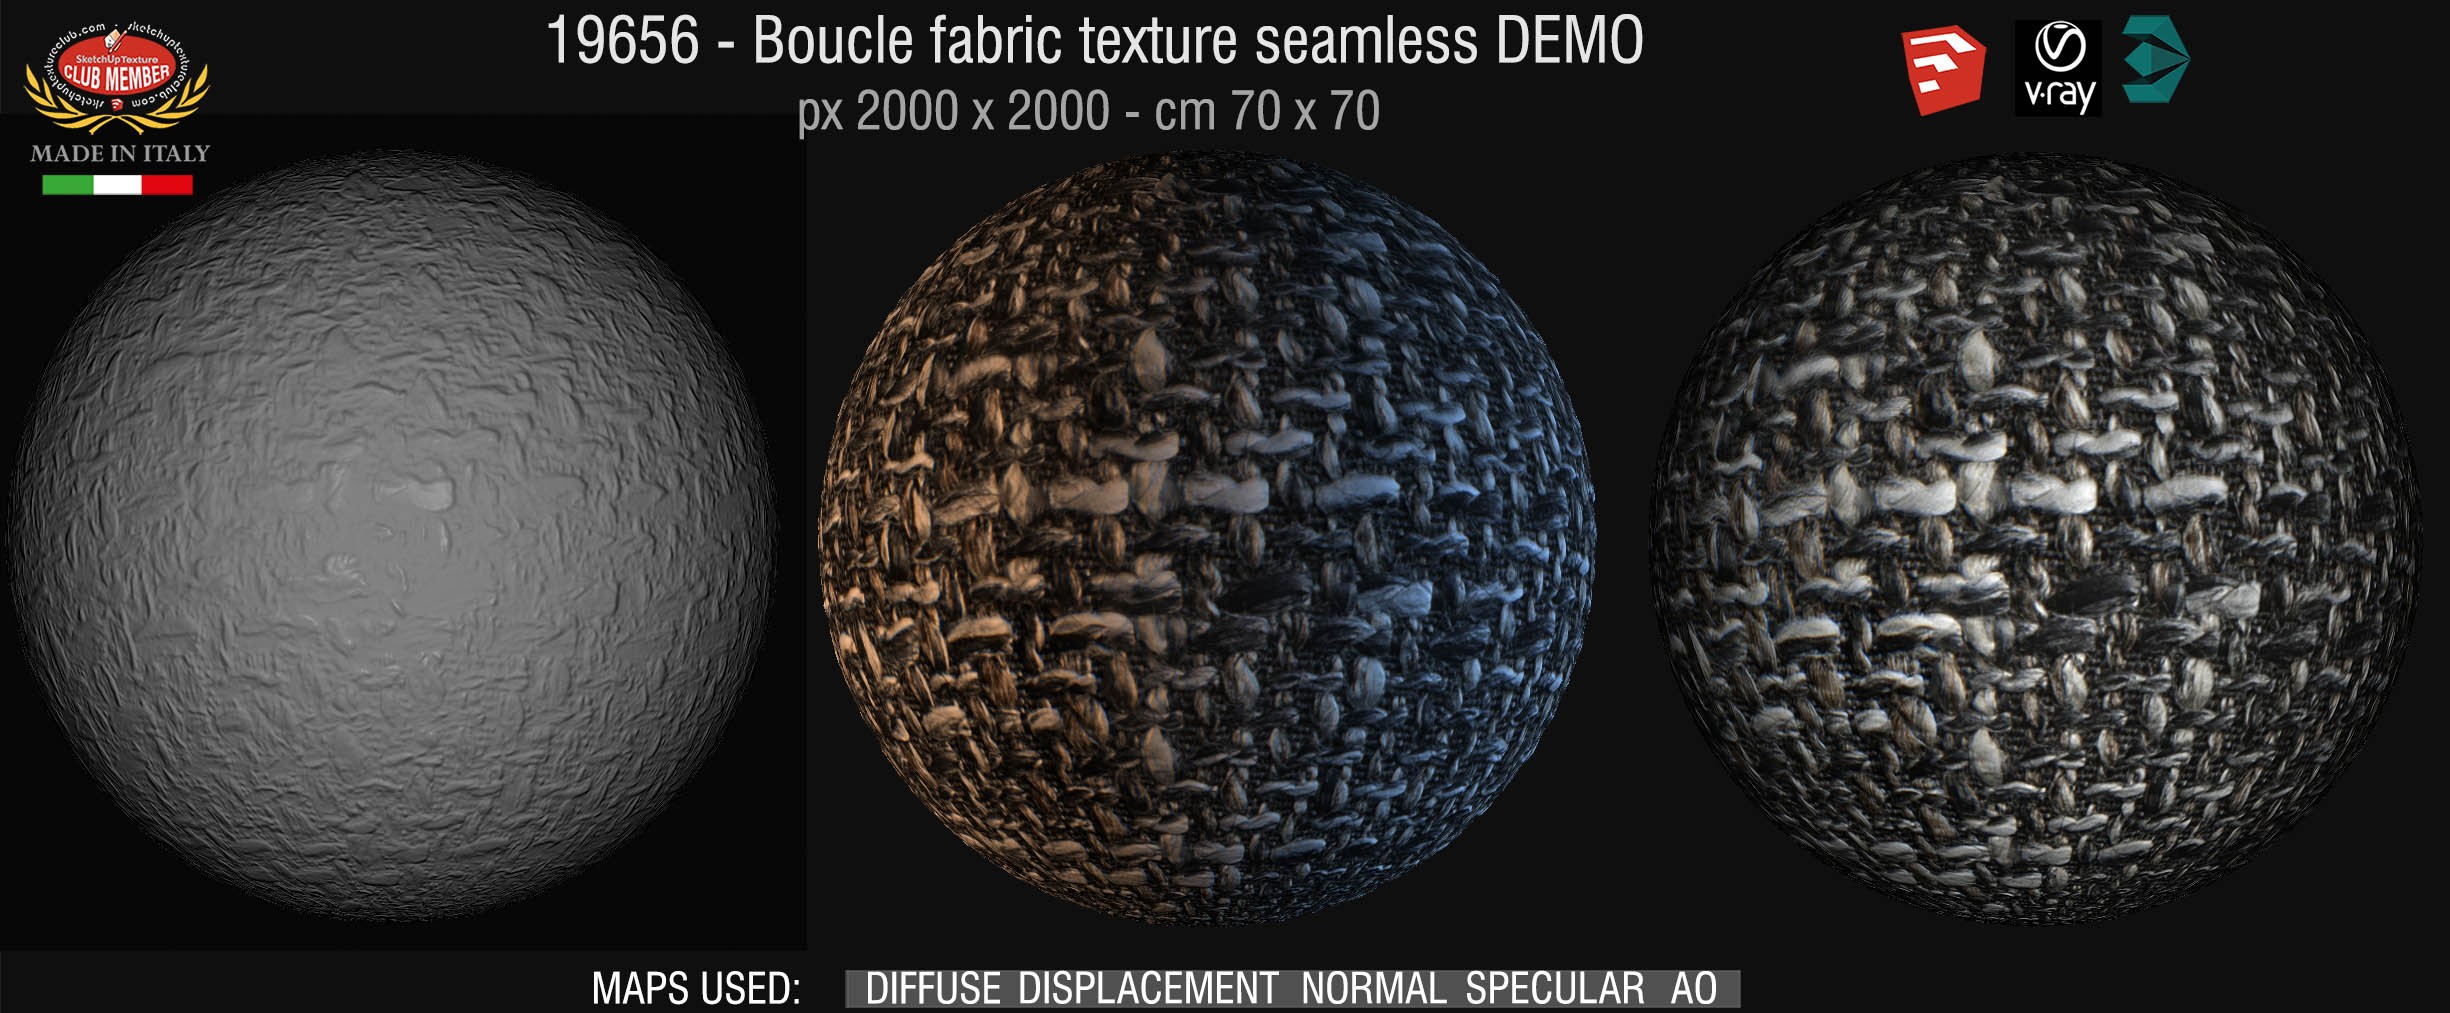 19656 Boucle fabric texture seamless + maps DEMO